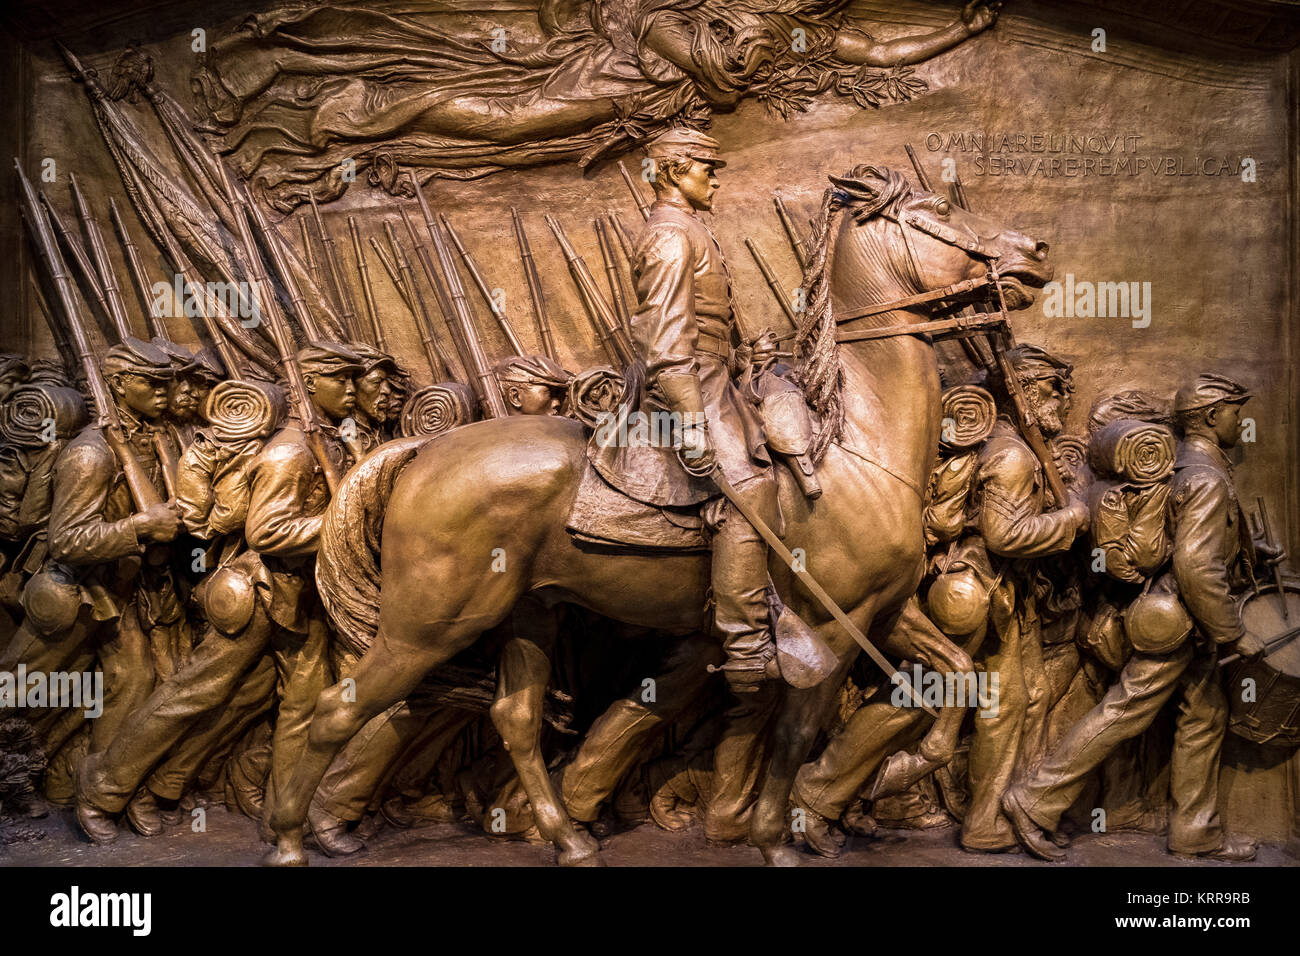 WASHINGTON DC, United States — A plaster mural from the Shaw Memorial by Augustus Saint-Gaudens (1848-1907). It is now on display at the National Gallery of Art in Washington DC. The National Gallery of Art is renowned for its collection of European and American art, offering a comprehensive timeline of artistic development from the Middle Ages to the present day. Its esteemed status as a free public museum underscores its national significance and commitment to art education. Stock Photo